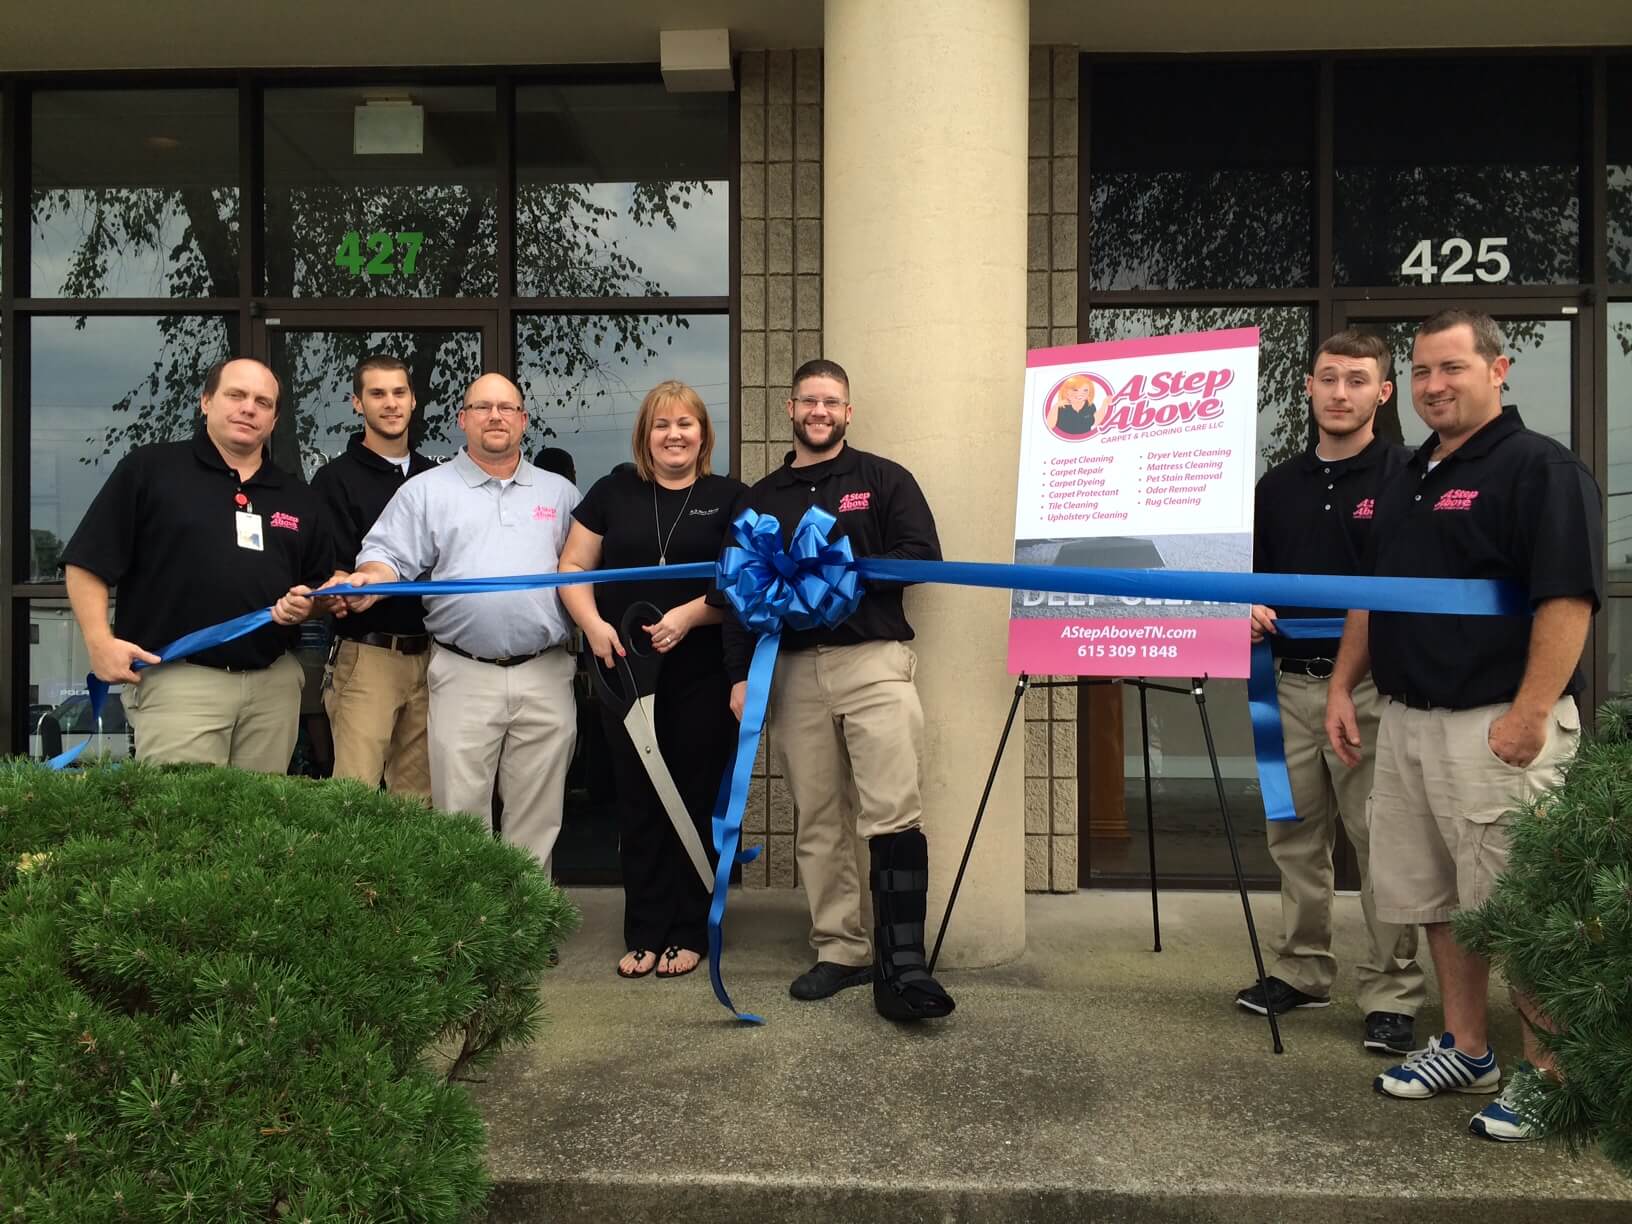 A Step Above opening their new office in Nashville